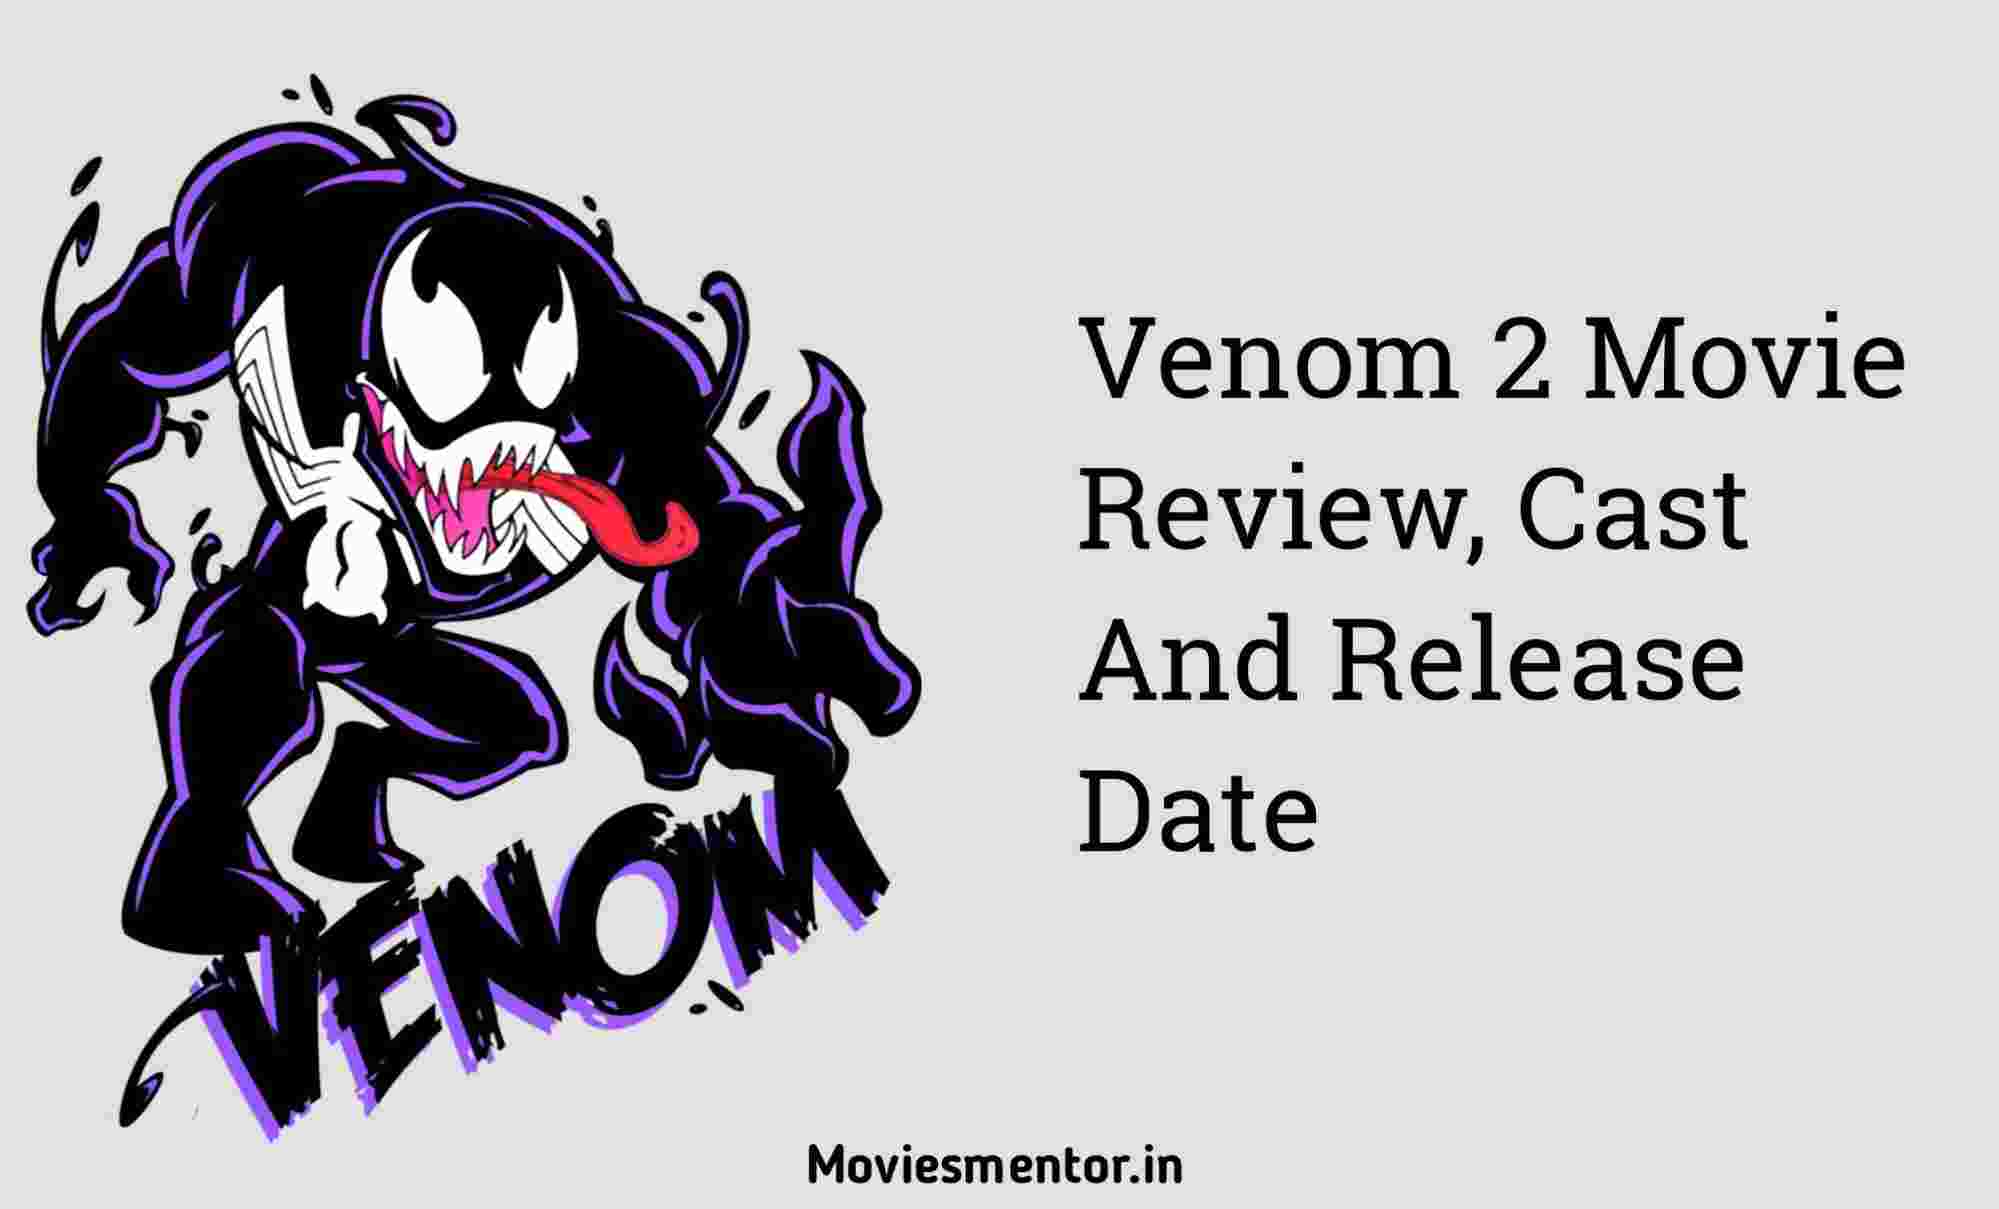 Venom: Let There Be Carnage Review (Worth TO Watch)